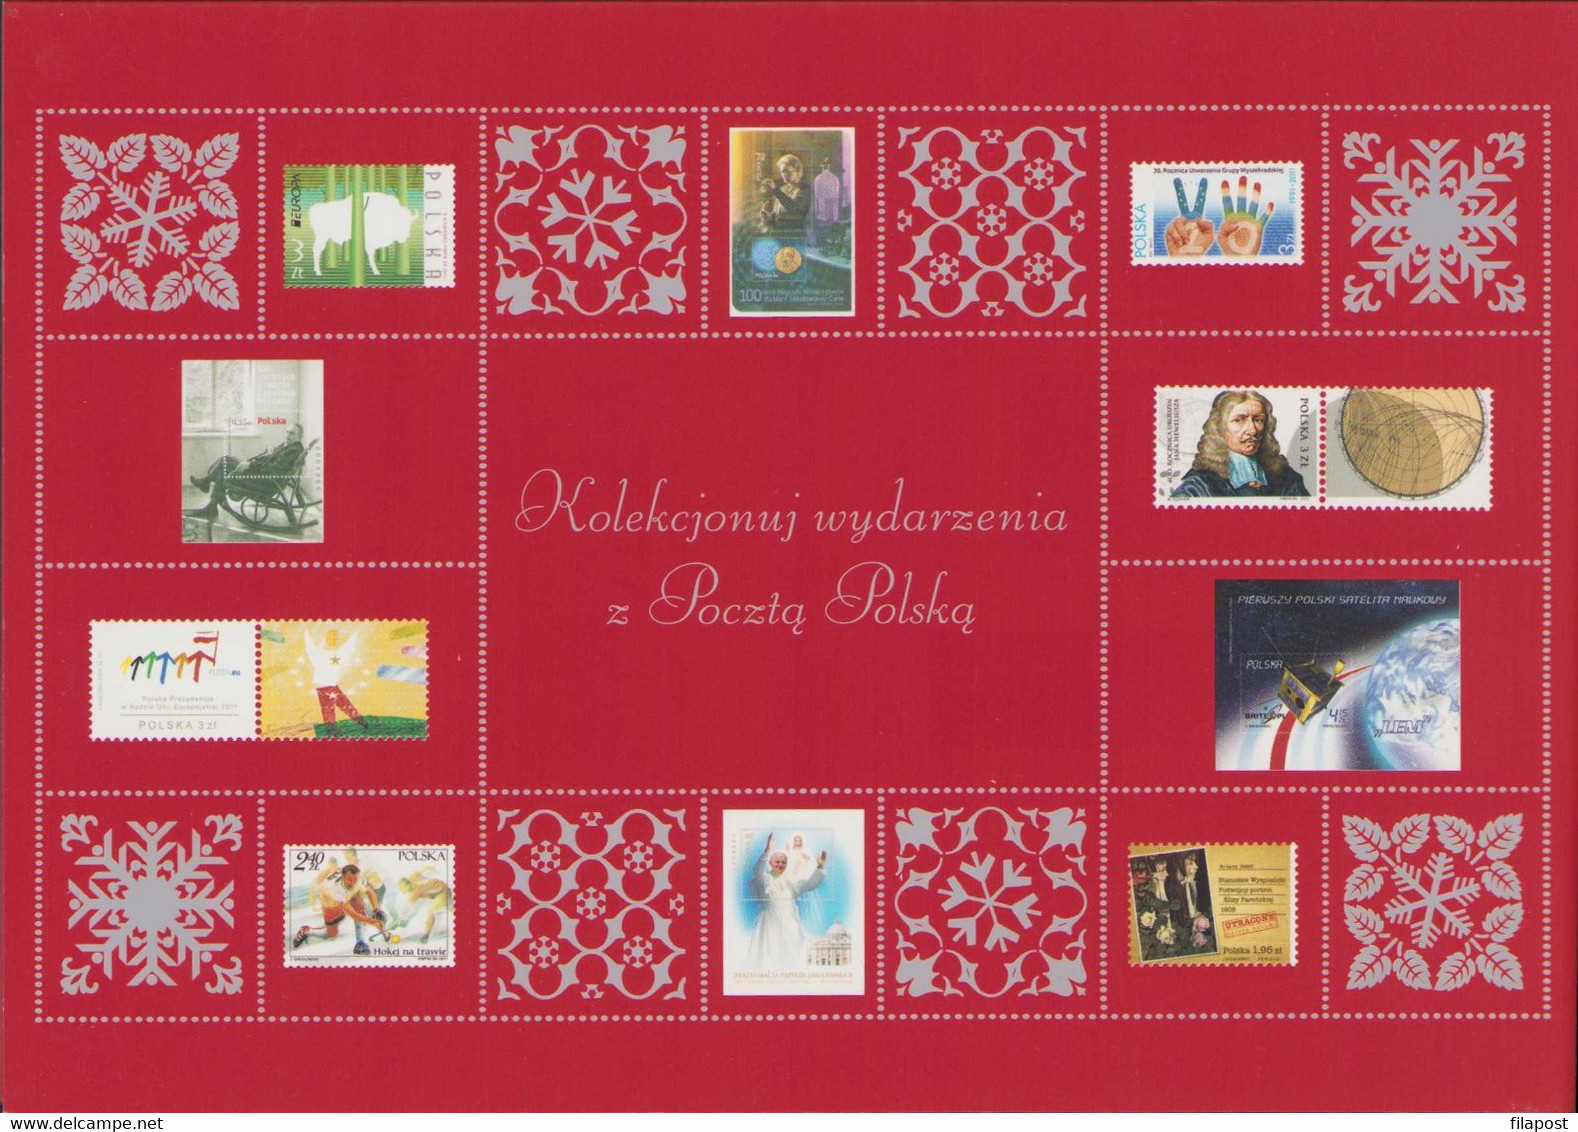 POLAND 2011 Booklet / Christmas Holiday, Saint Mary, Jesus, Santa Claus, Reindeer / 2 FDC + 2 Stamps MNH** - Carnets